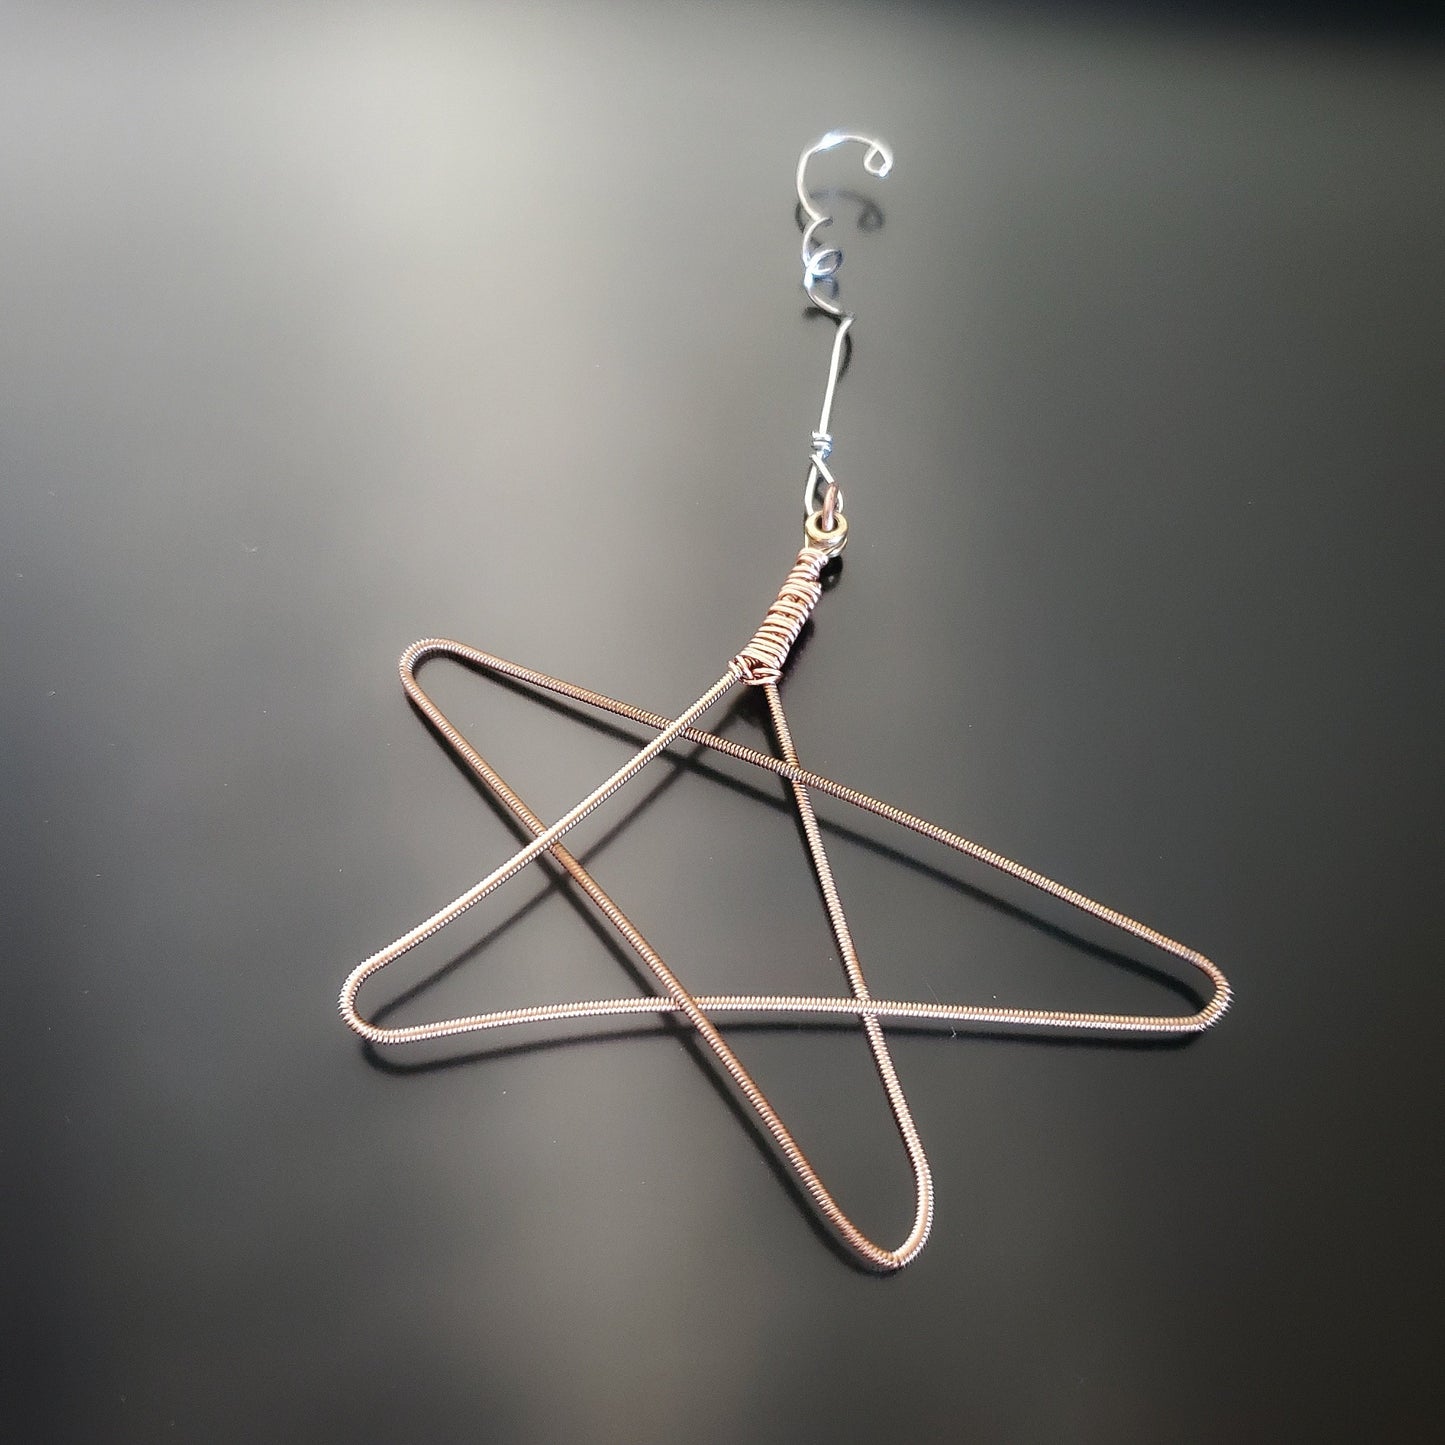 Christmas ornament in the shape of a star, made from an upcycled guitar string